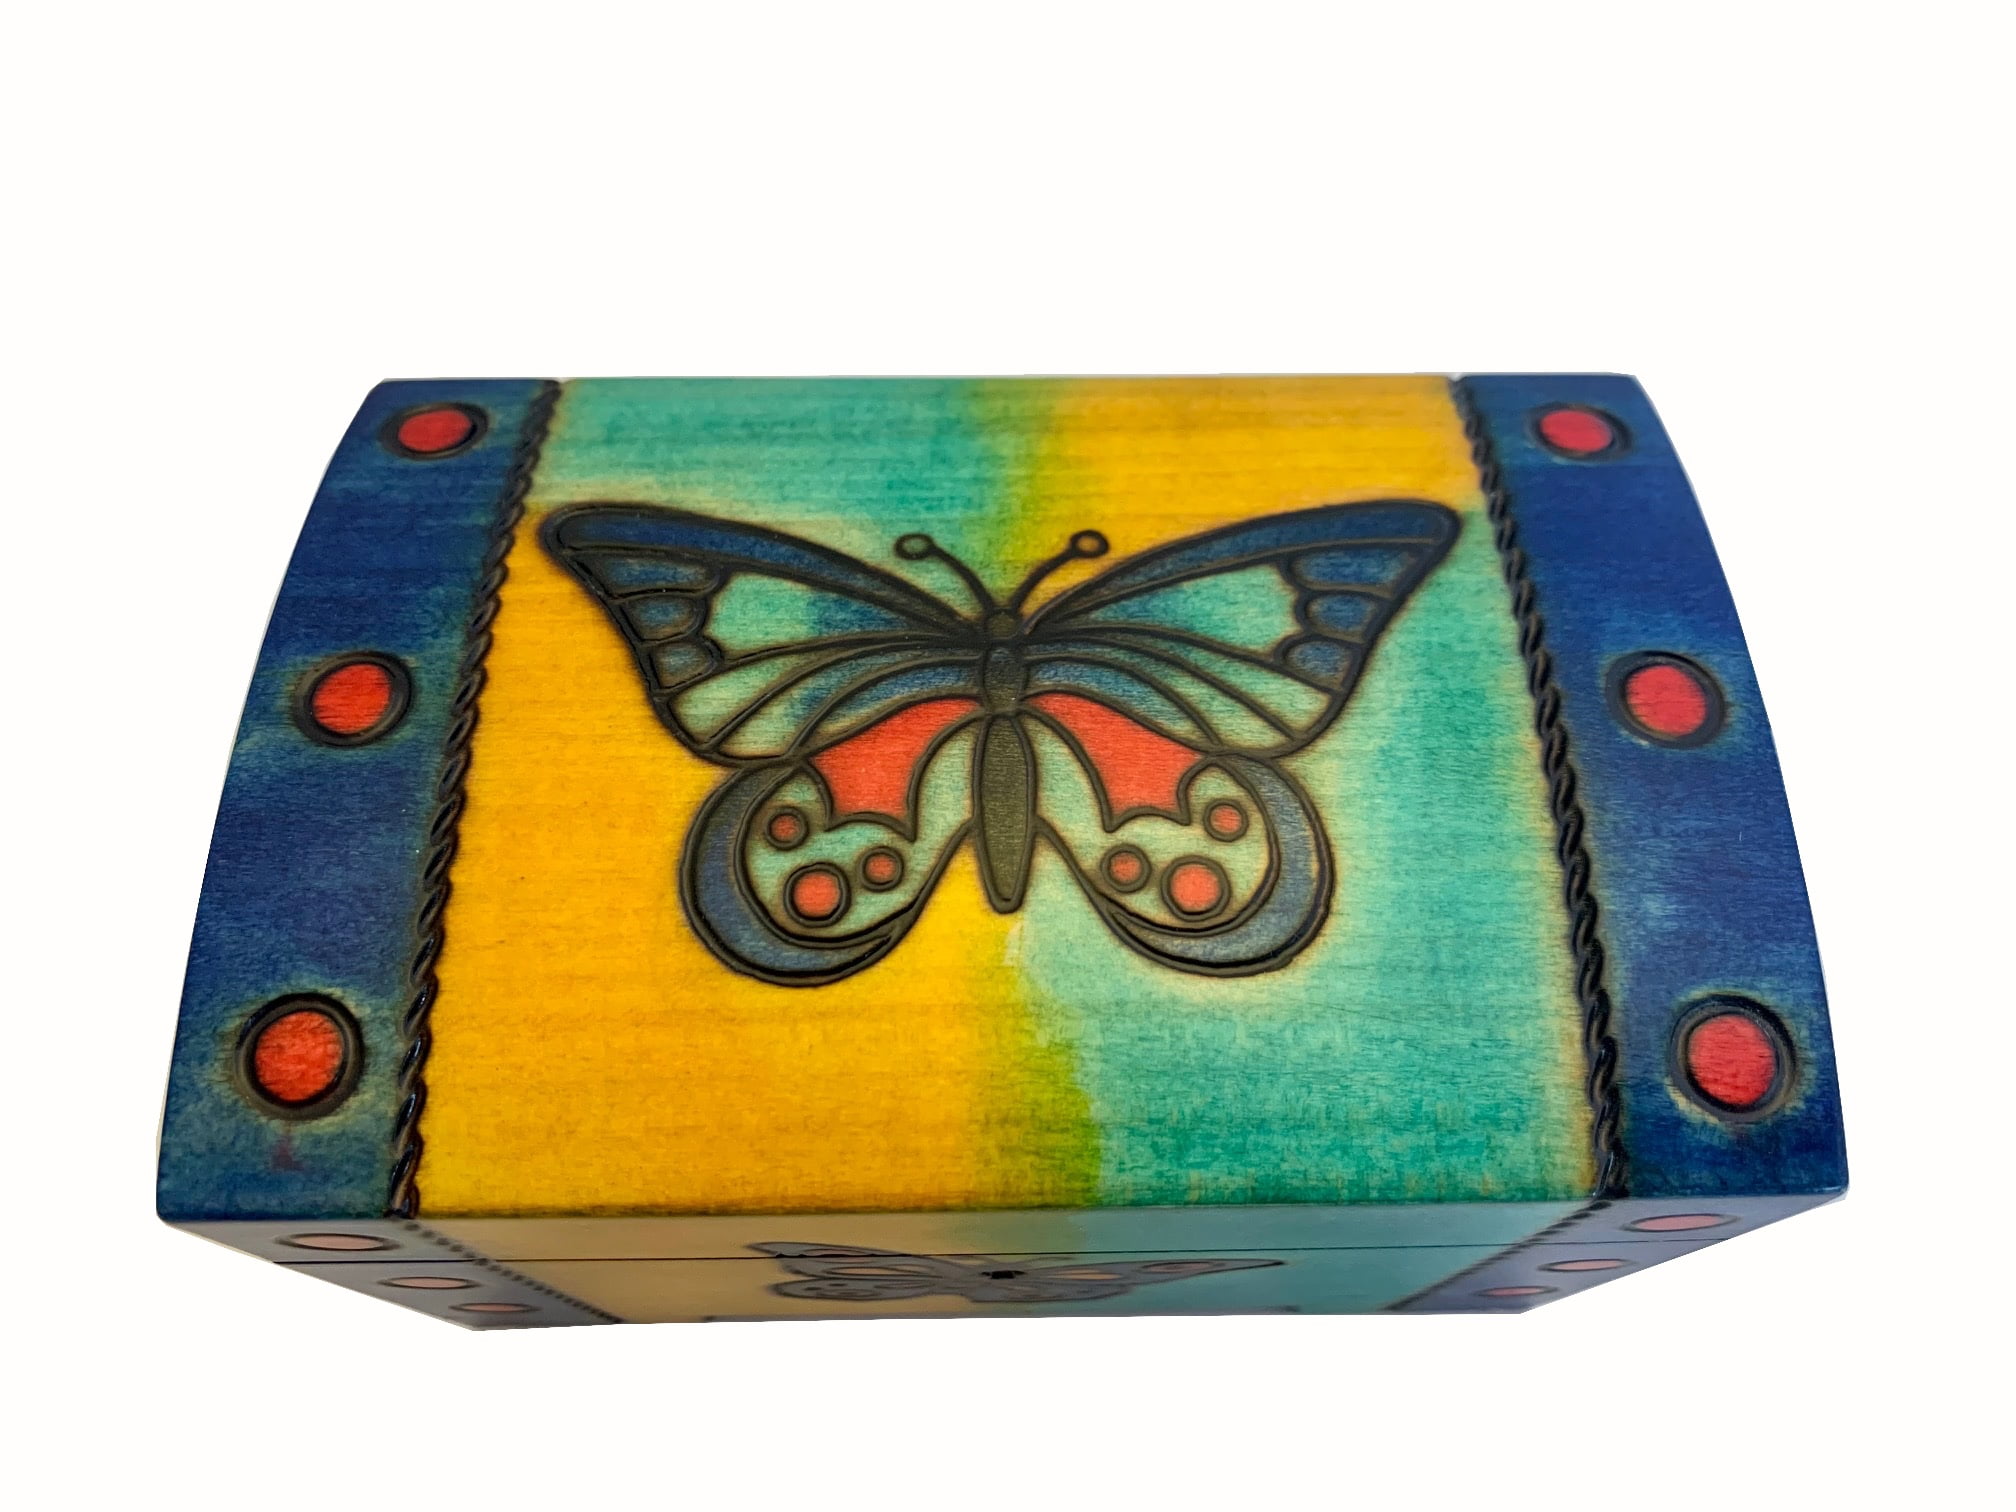 jewelry box plastic Picture - More Detailed Picture about Butterfly  Princess Desktop Storage Box Drawer, mul…